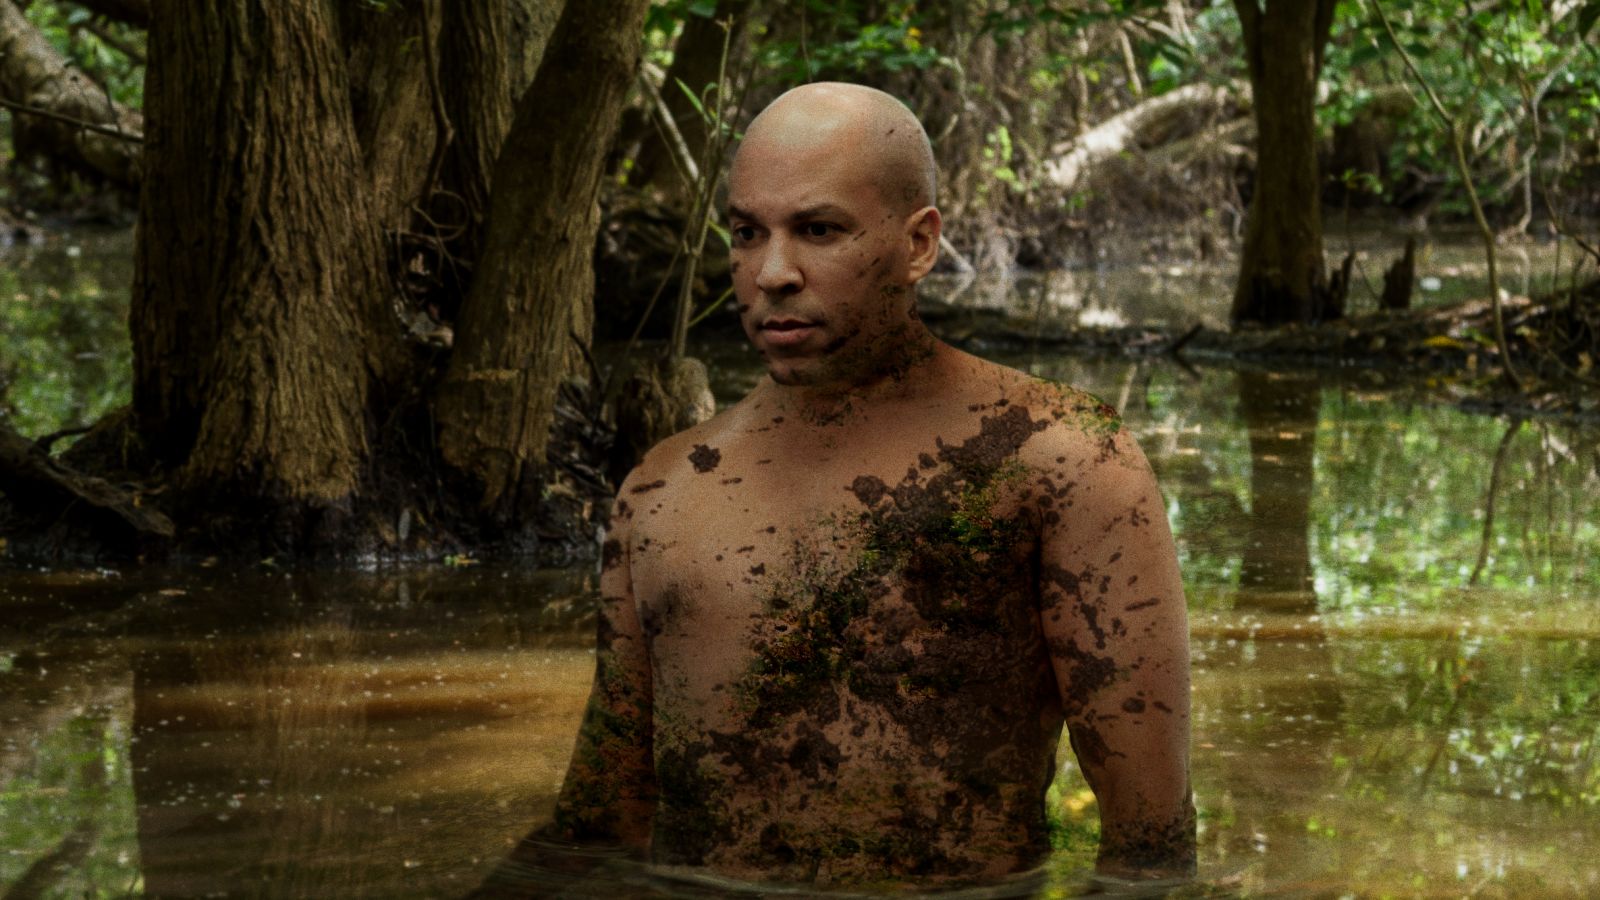 Salg faldskærm trist The Onion on Twitter: "Cory Booker Expelled From Senate, Stripped Naked,  Forced To Wander Maryland Bog In Woe For All Eternity  https://t.co/ANzbijOVDq https://t.co/R0s7TDf959" / Twitter